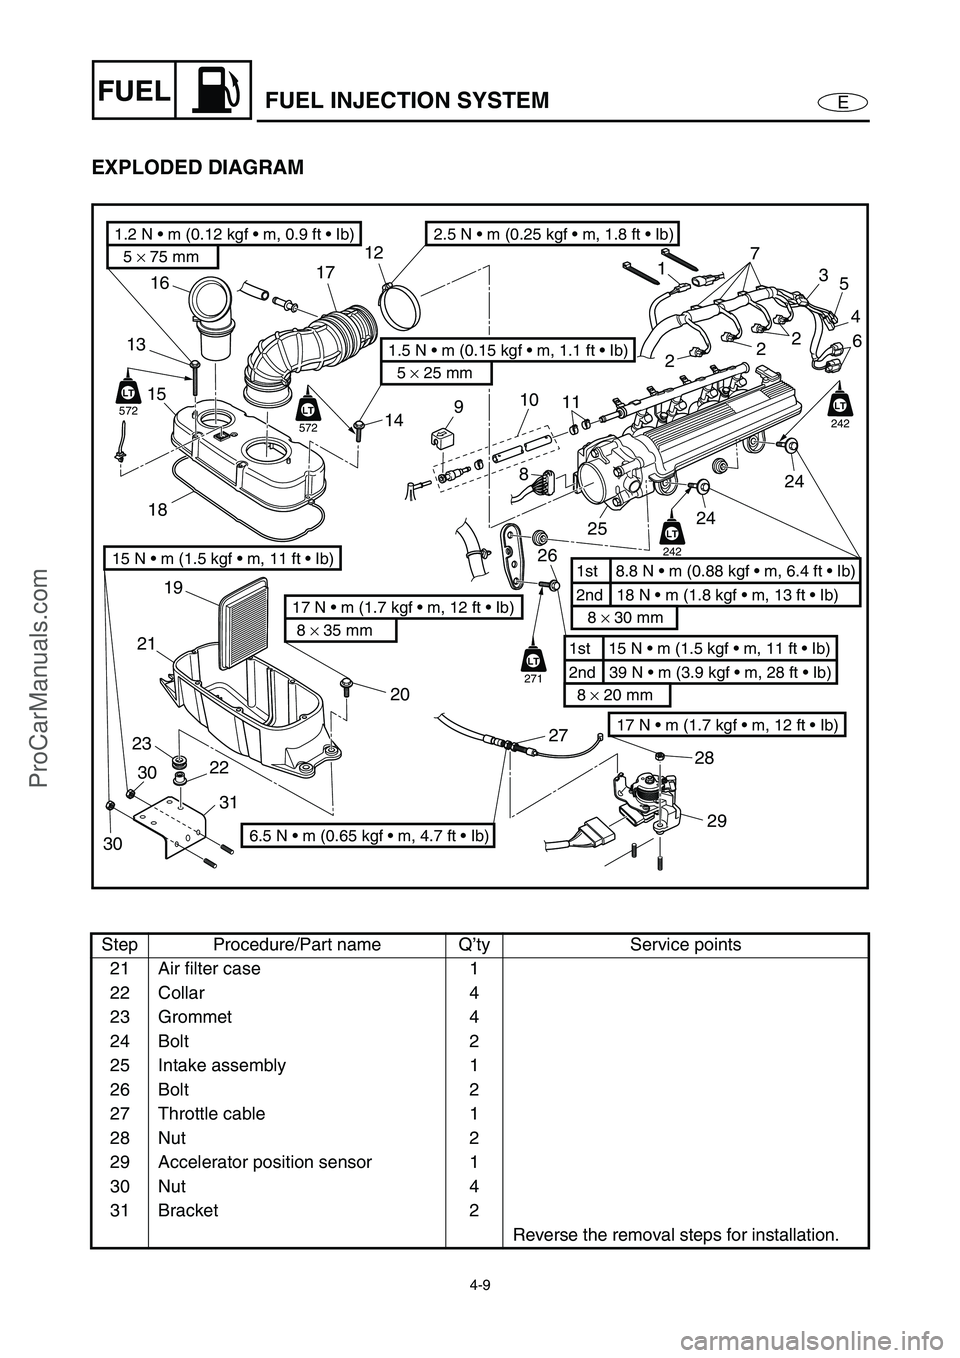 YAMAHA VX110 2005  Service Manual 4-9
EFUELFUEL INJECTION SYSTEM
EXPLODED DIAGRAM
Step Procedure/Part name Q’ty Service points
21 Air filter case 1
22 Collar 4
23 Grommet 4
24 Bolt 2
25 Intake assembly 1
26 Bolt 2
27 Throttle cable 